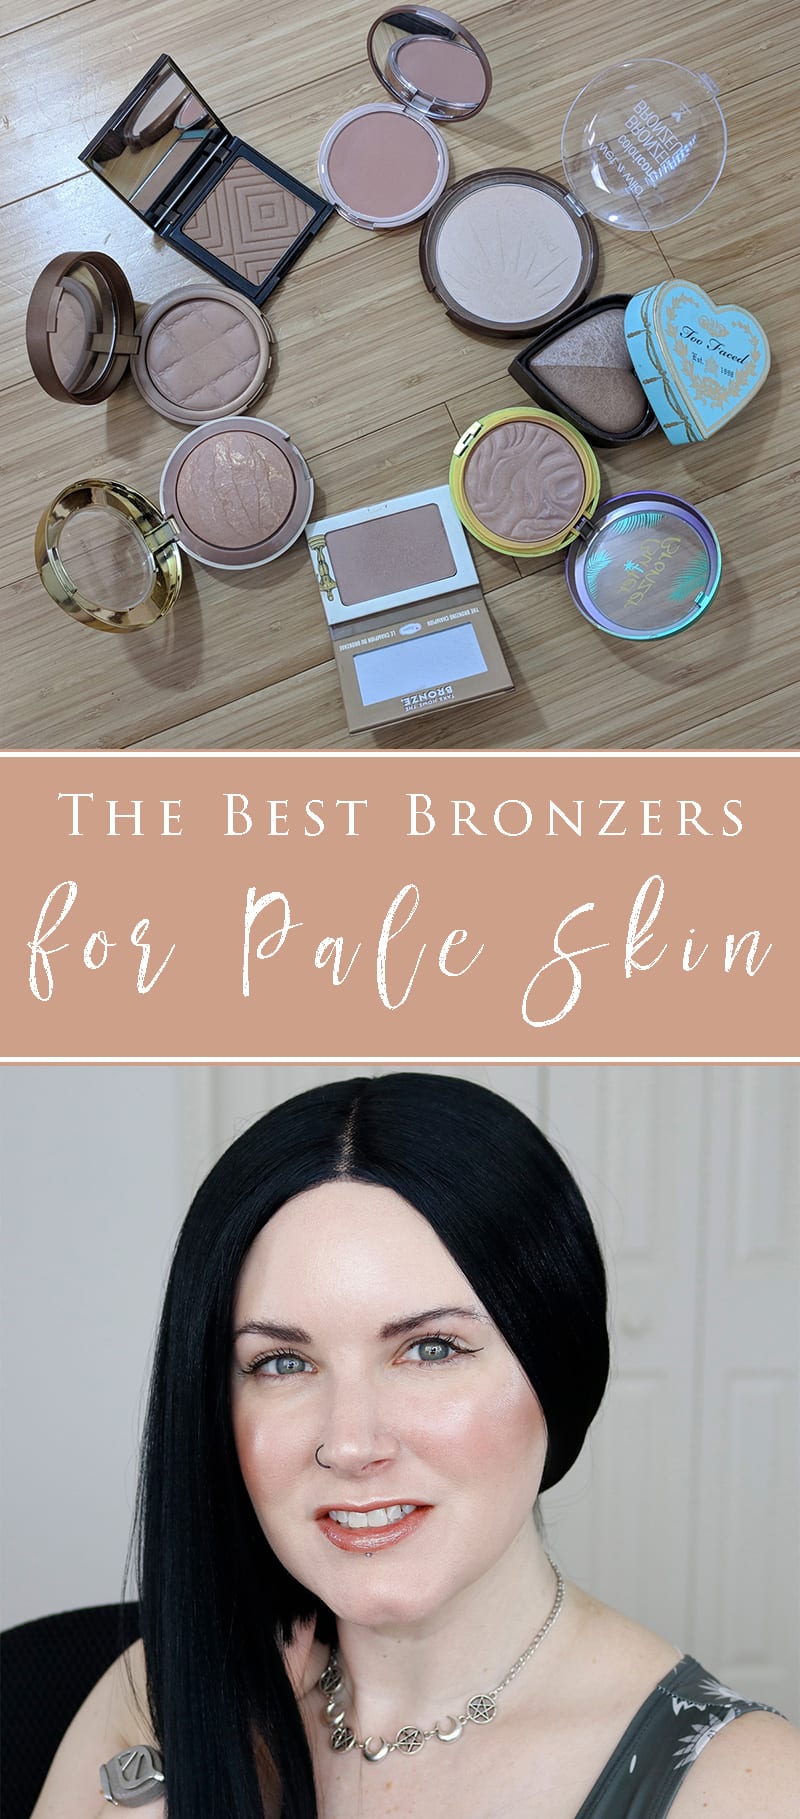 The Best Bronzers for Pale Skin - Your Search for Bronzer Ends Here!